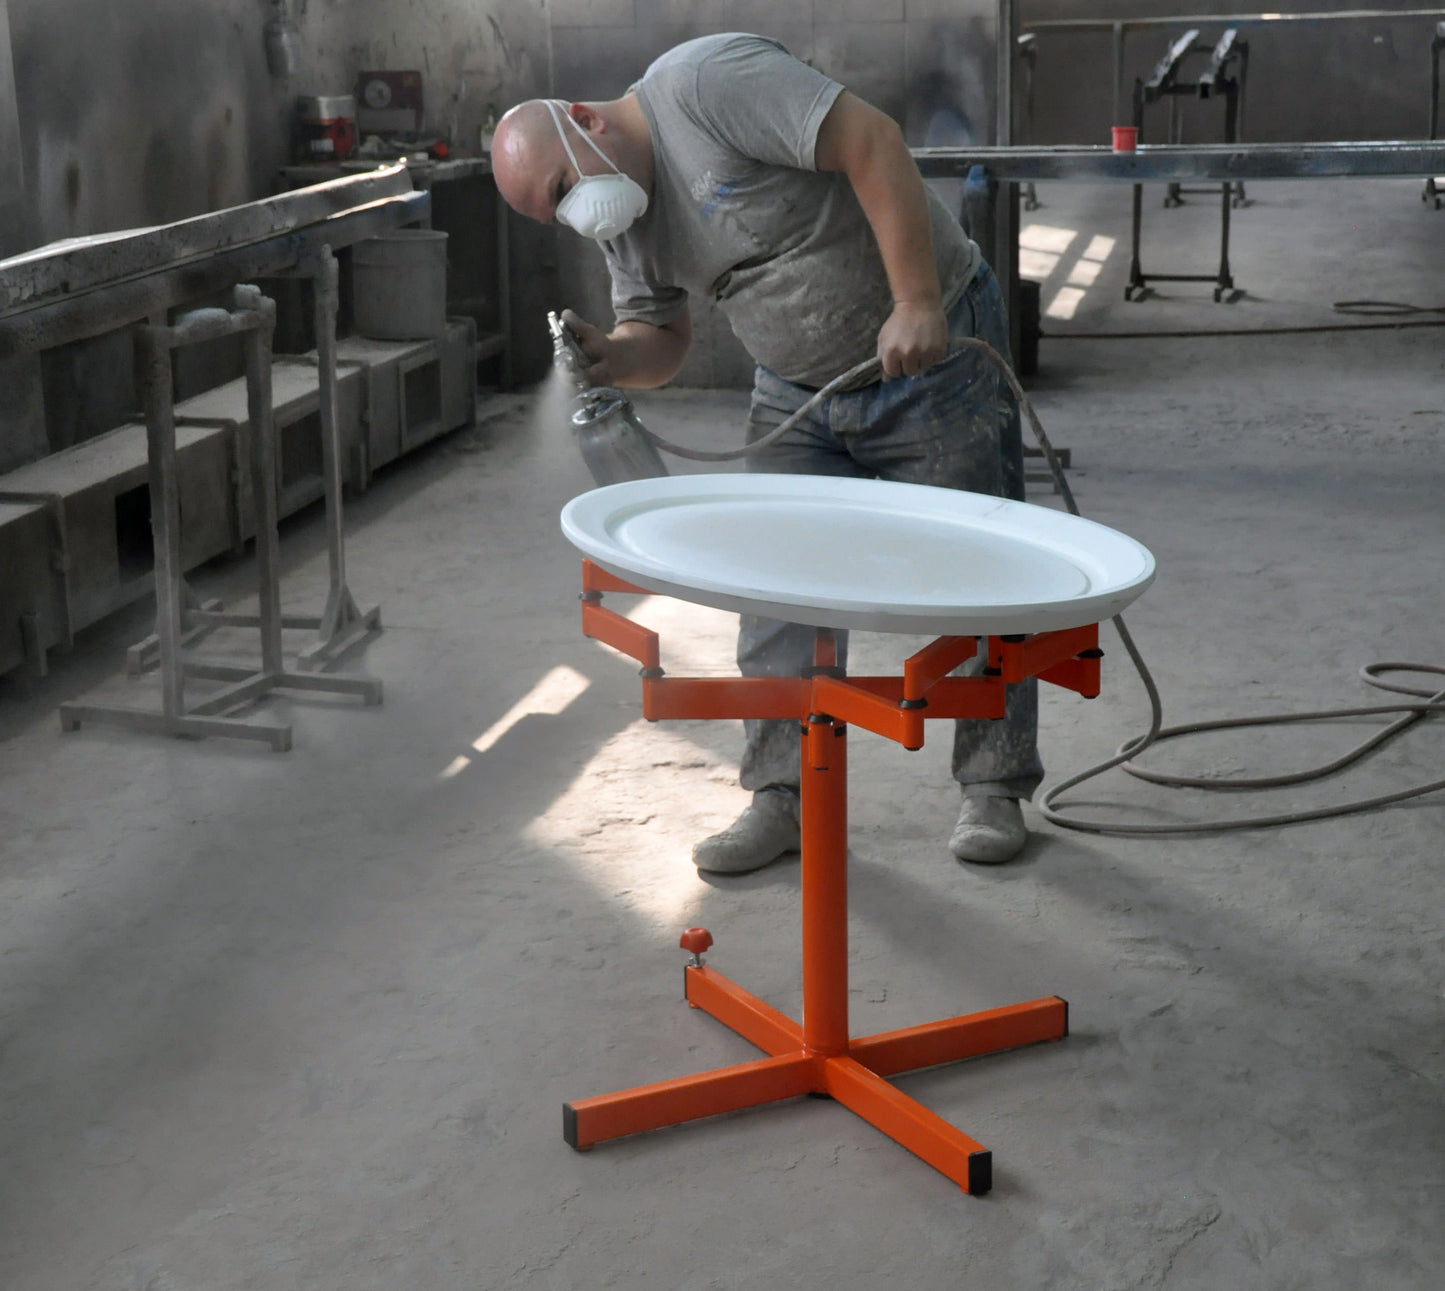 iTECH S Rotary Paint Spray Table (octopus)